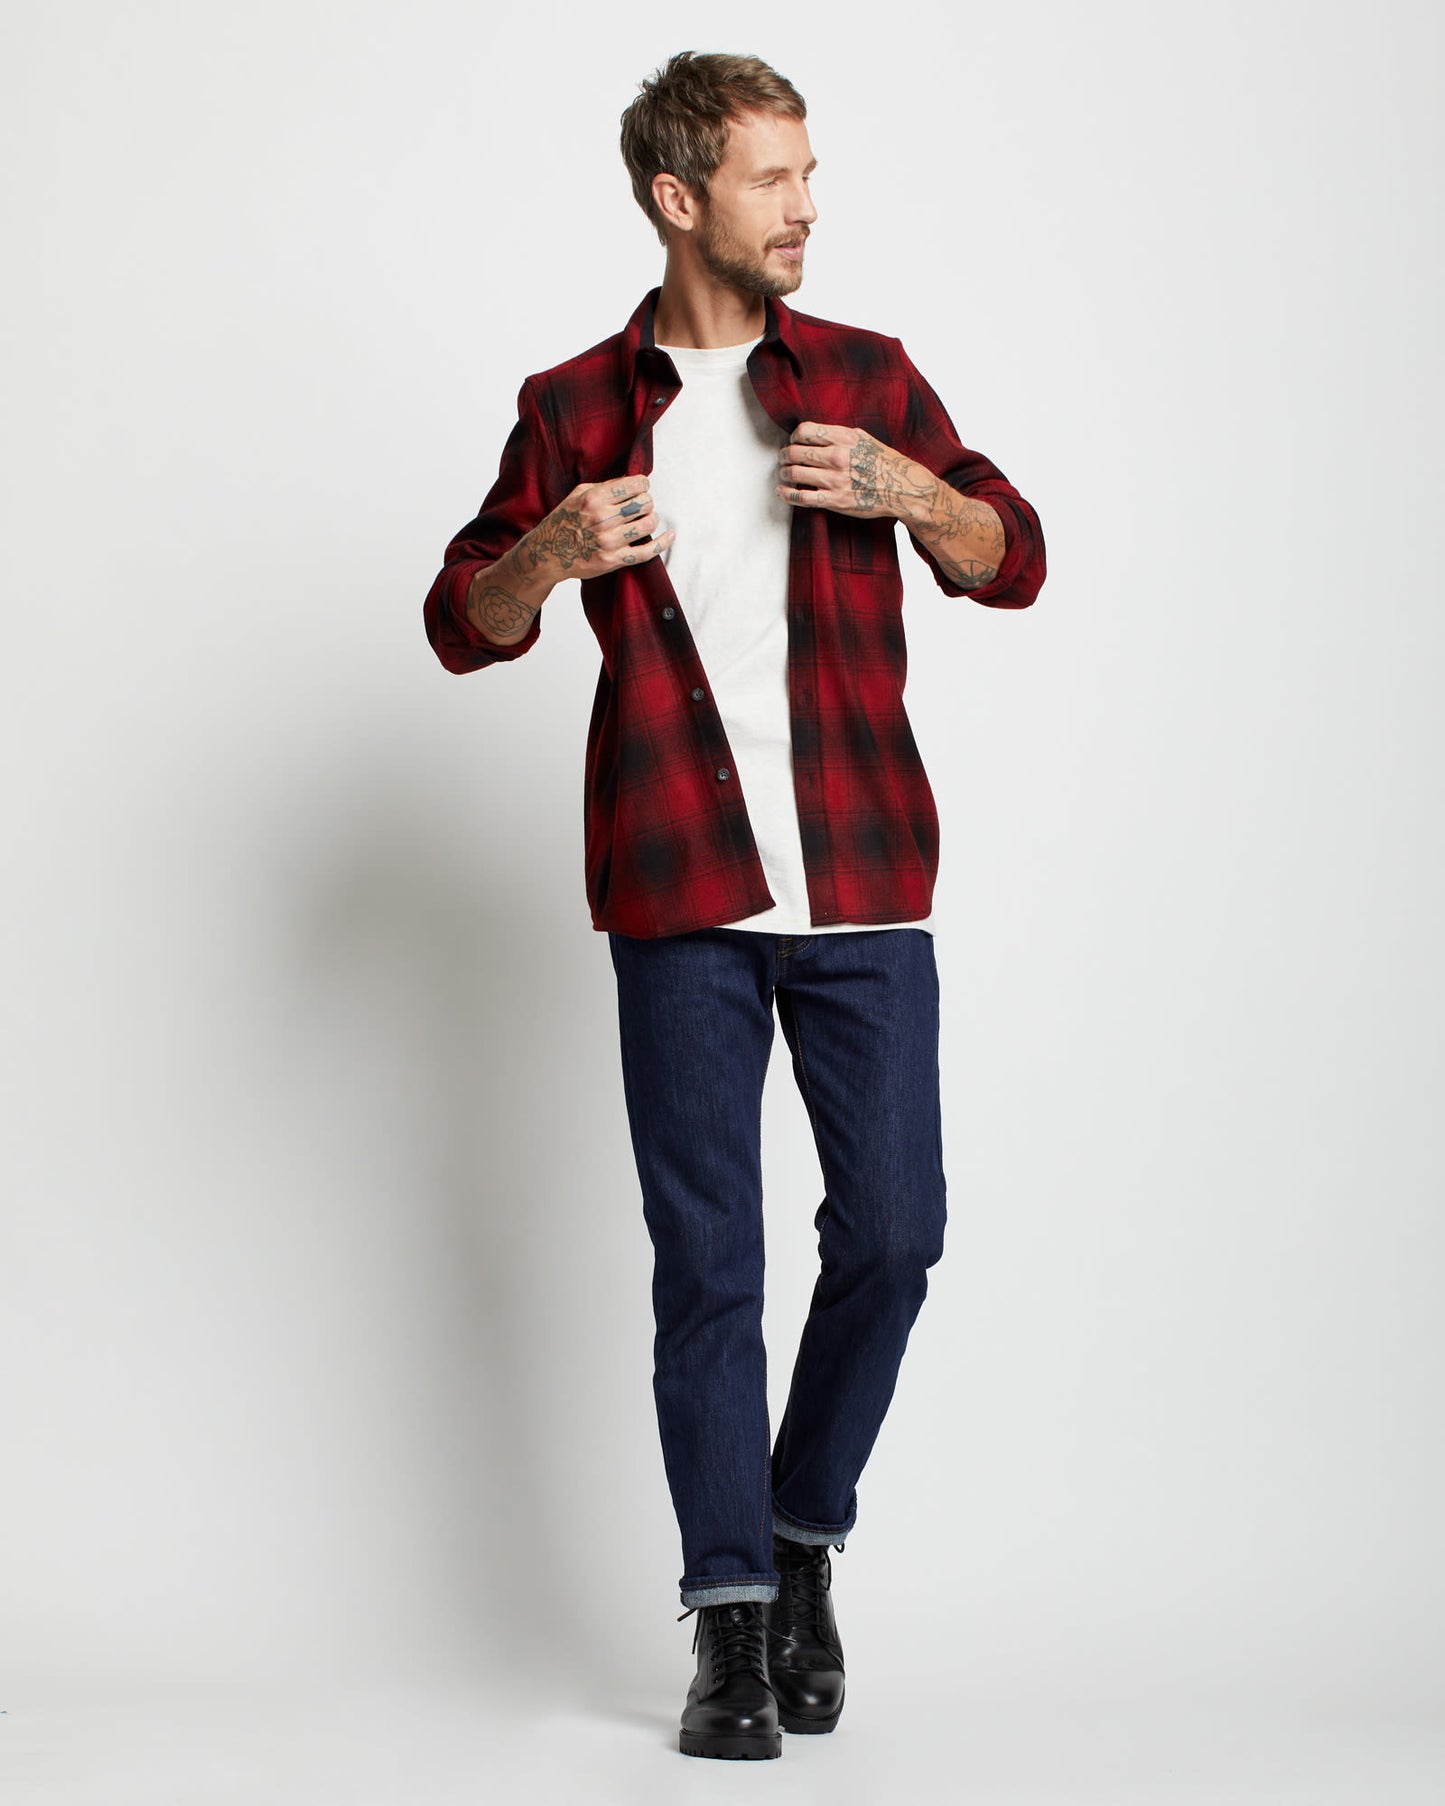 Pendleton Scout red and black plaid button down shirt, shown on model layered with white crew-neck shirt underneath